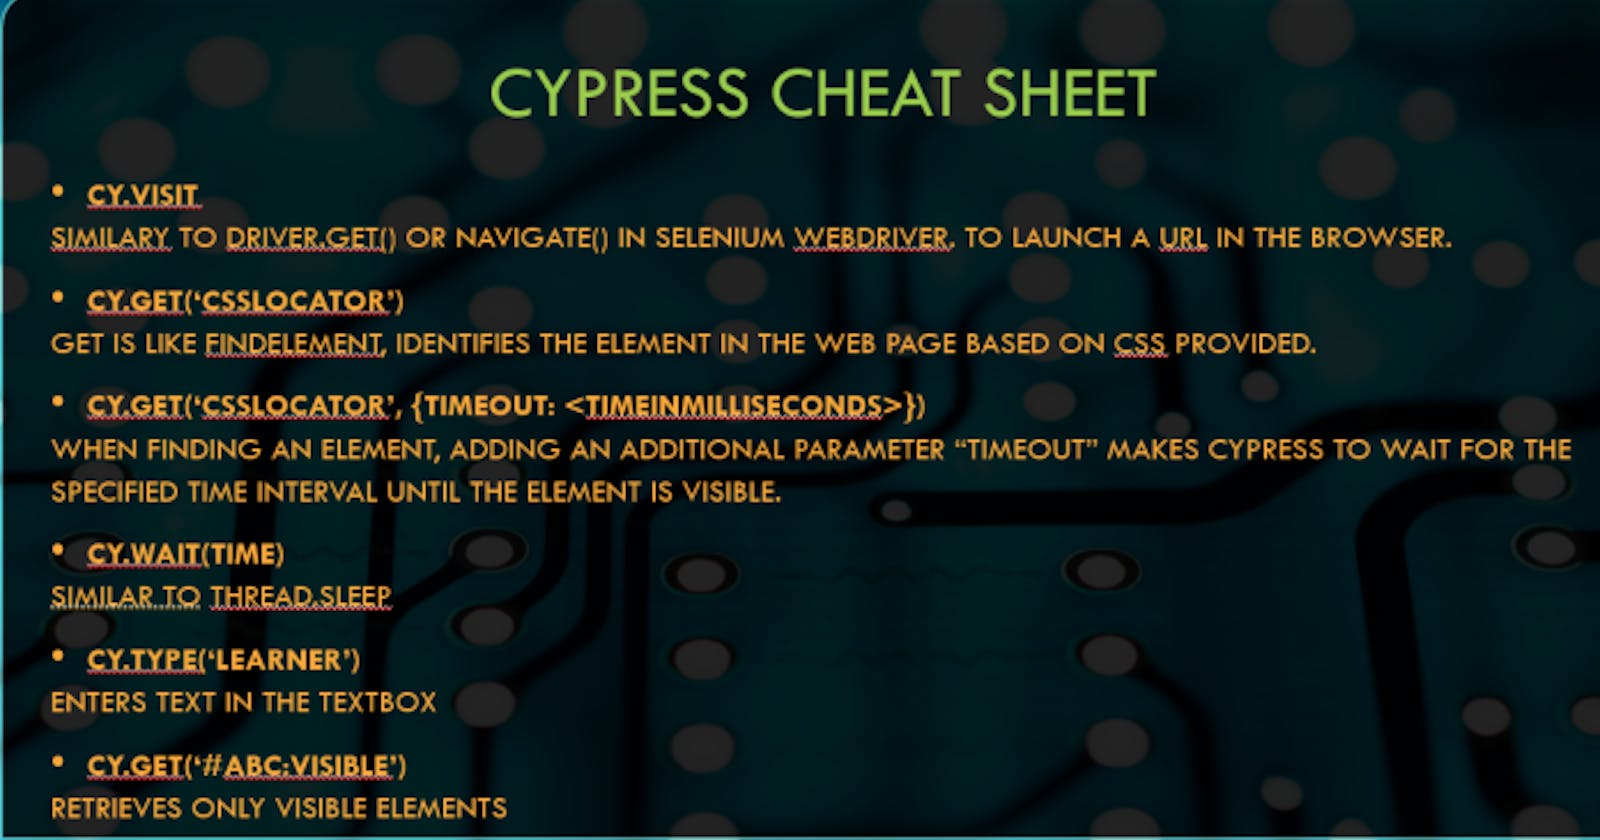 Cypress cheat sheet for 2023